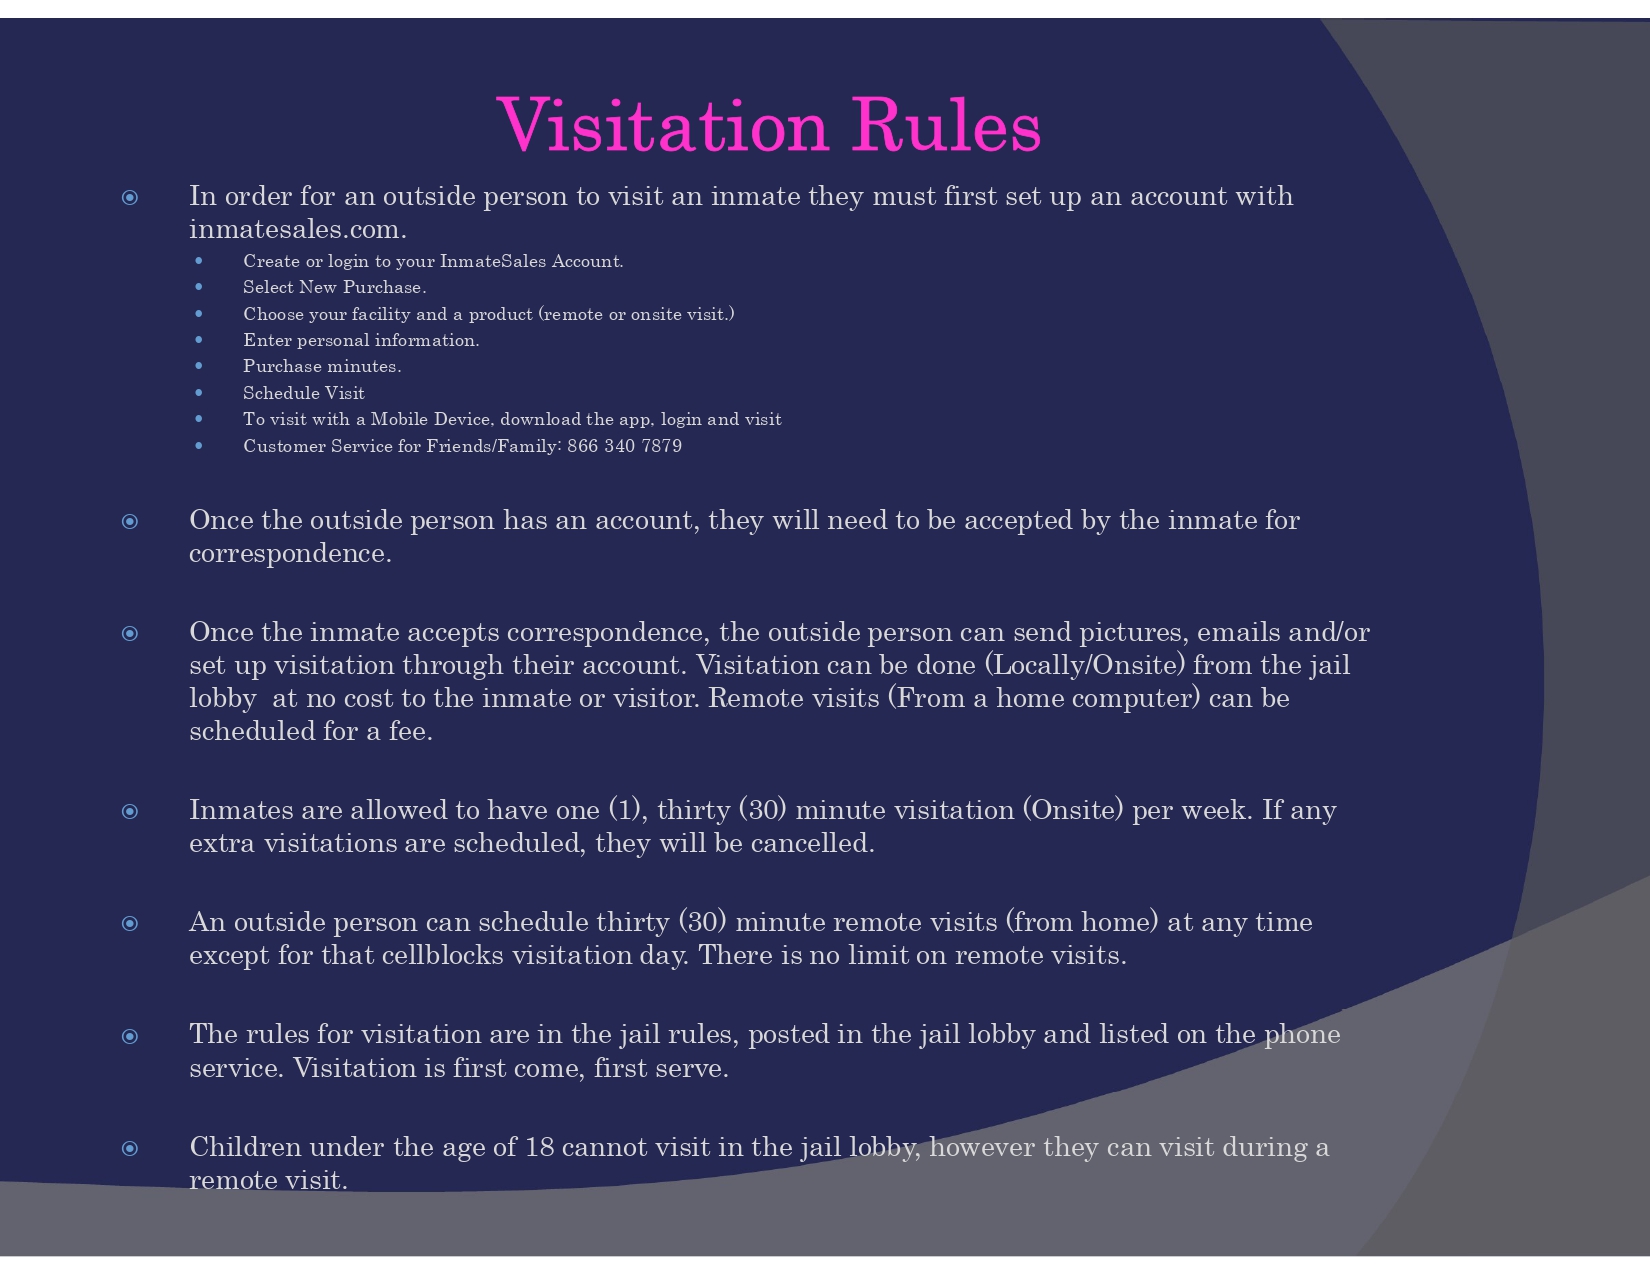 Visitation Rules page 2